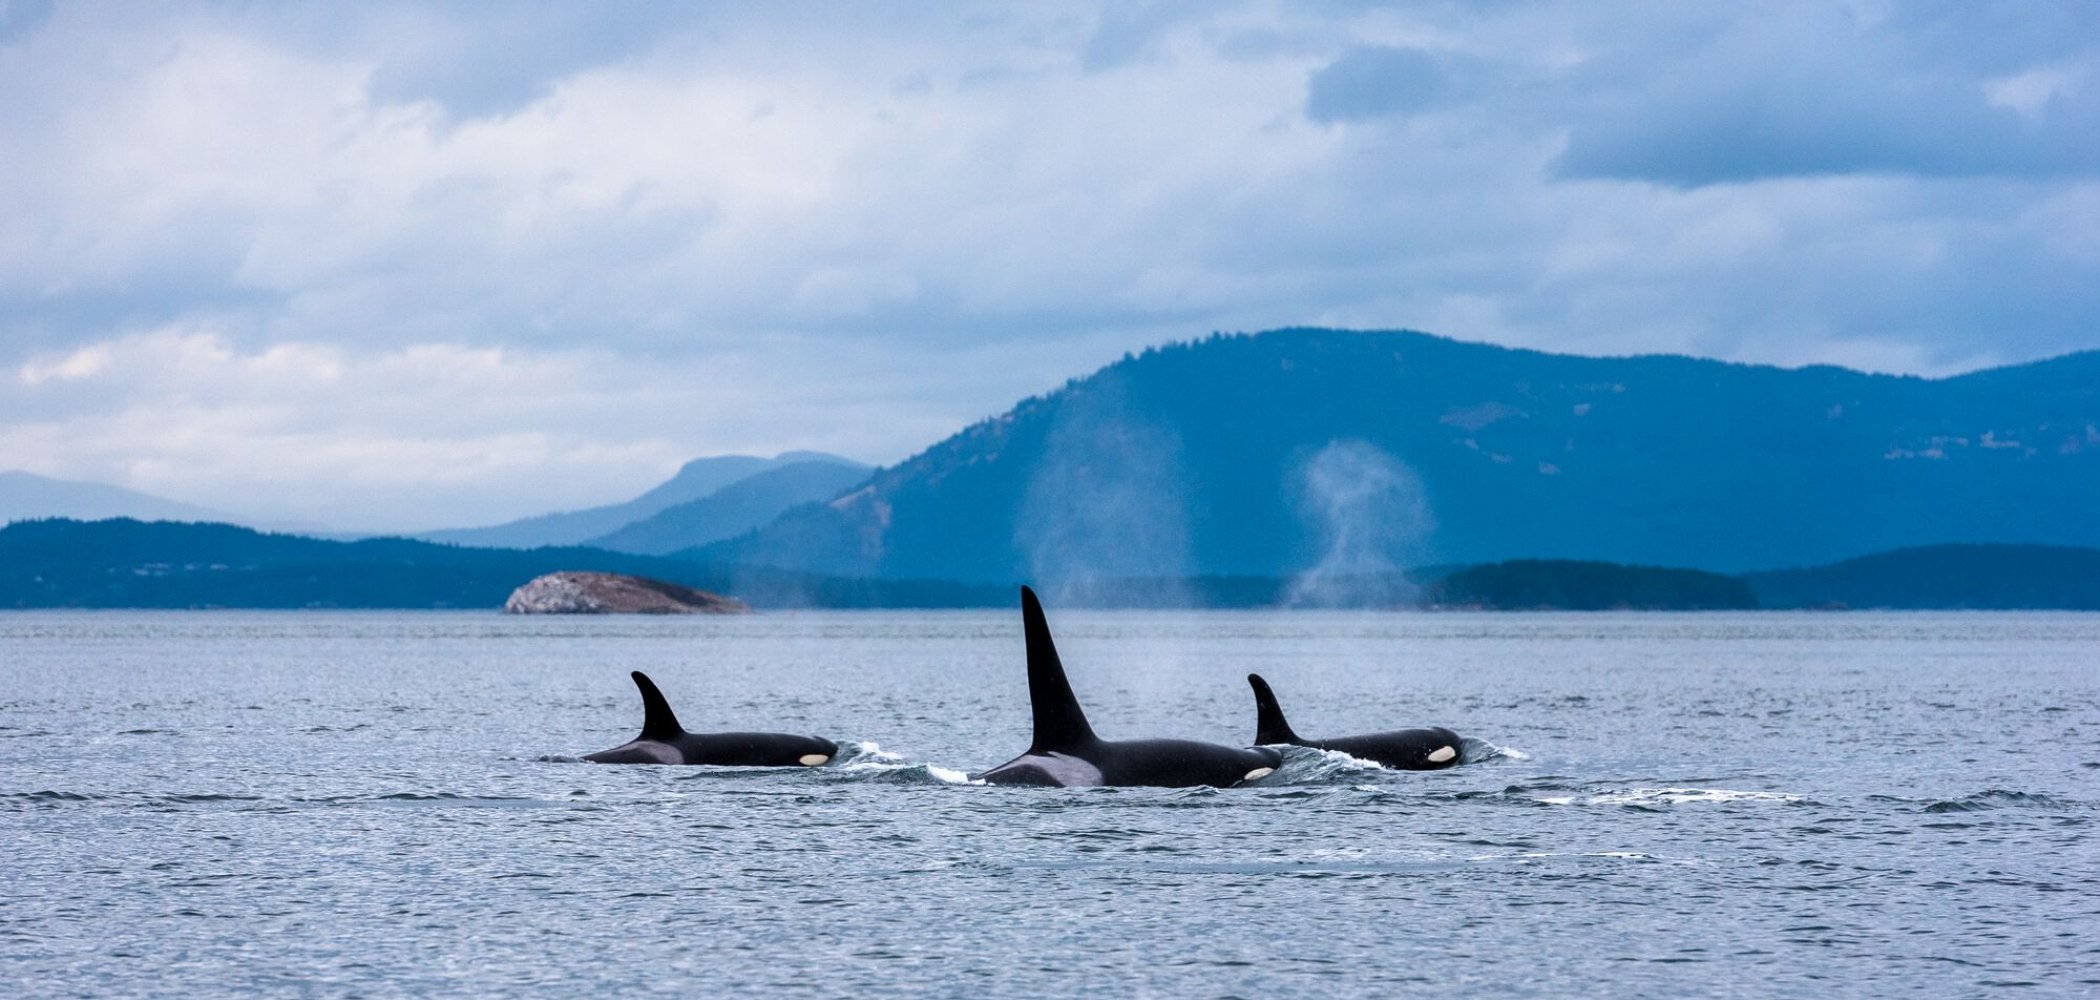 Three orcas swim close together with their dorsal fins high out of the water with a mountain backdrop